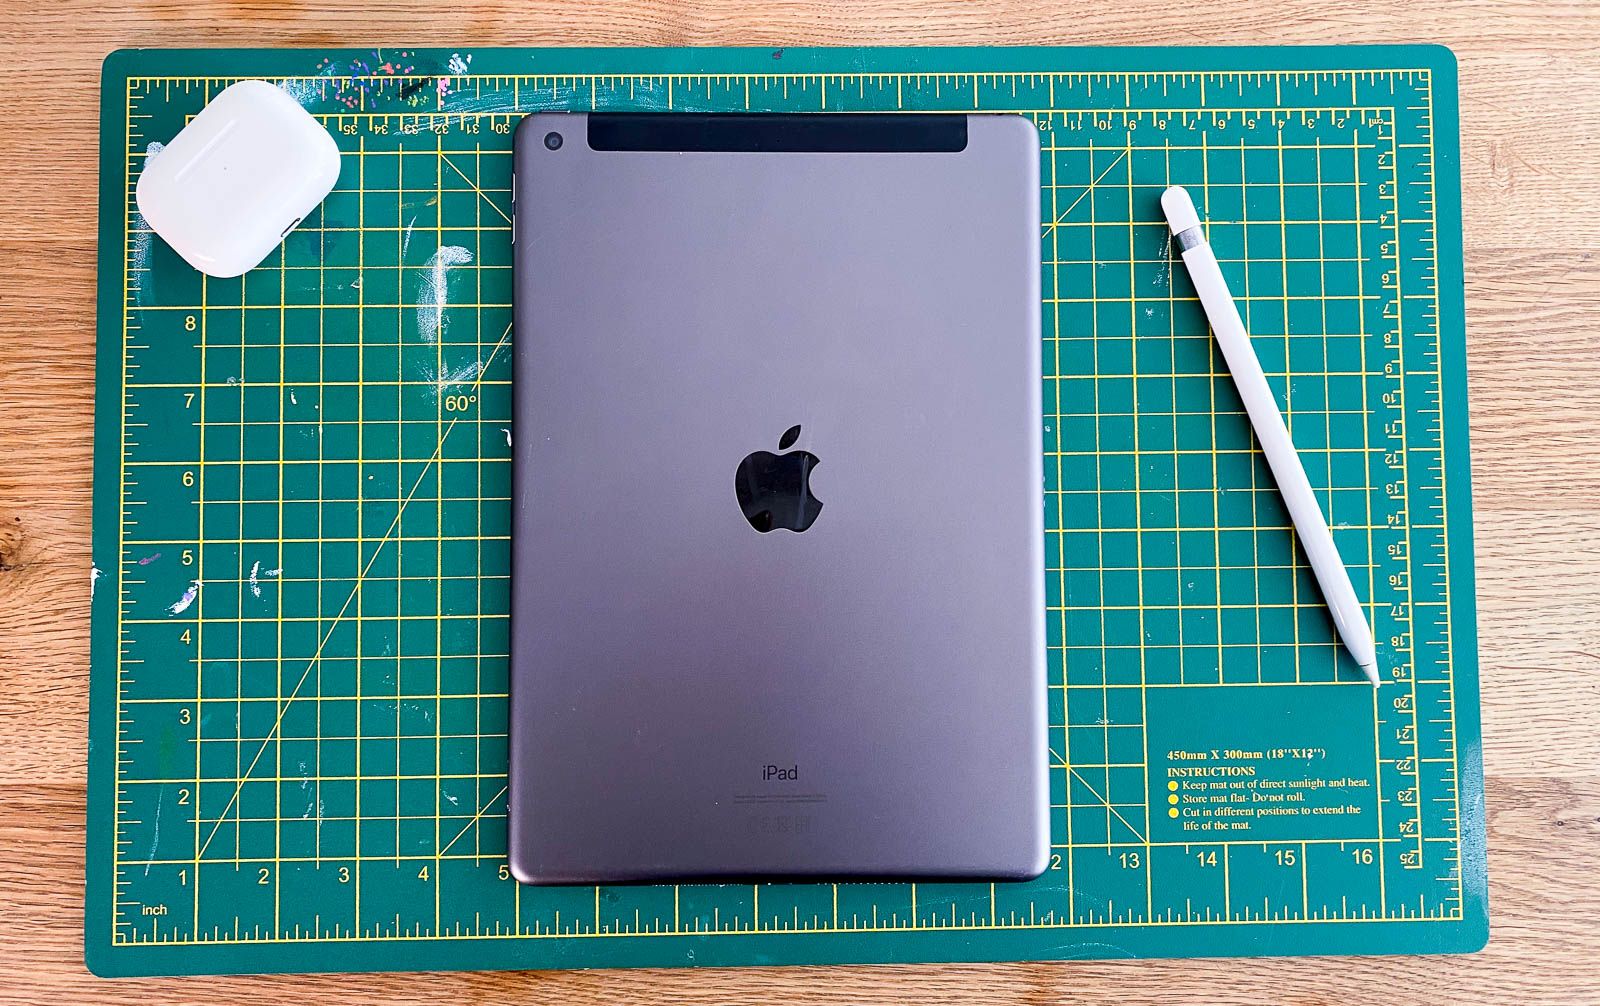  Apple iPad (2020) review: The new normal photo 1